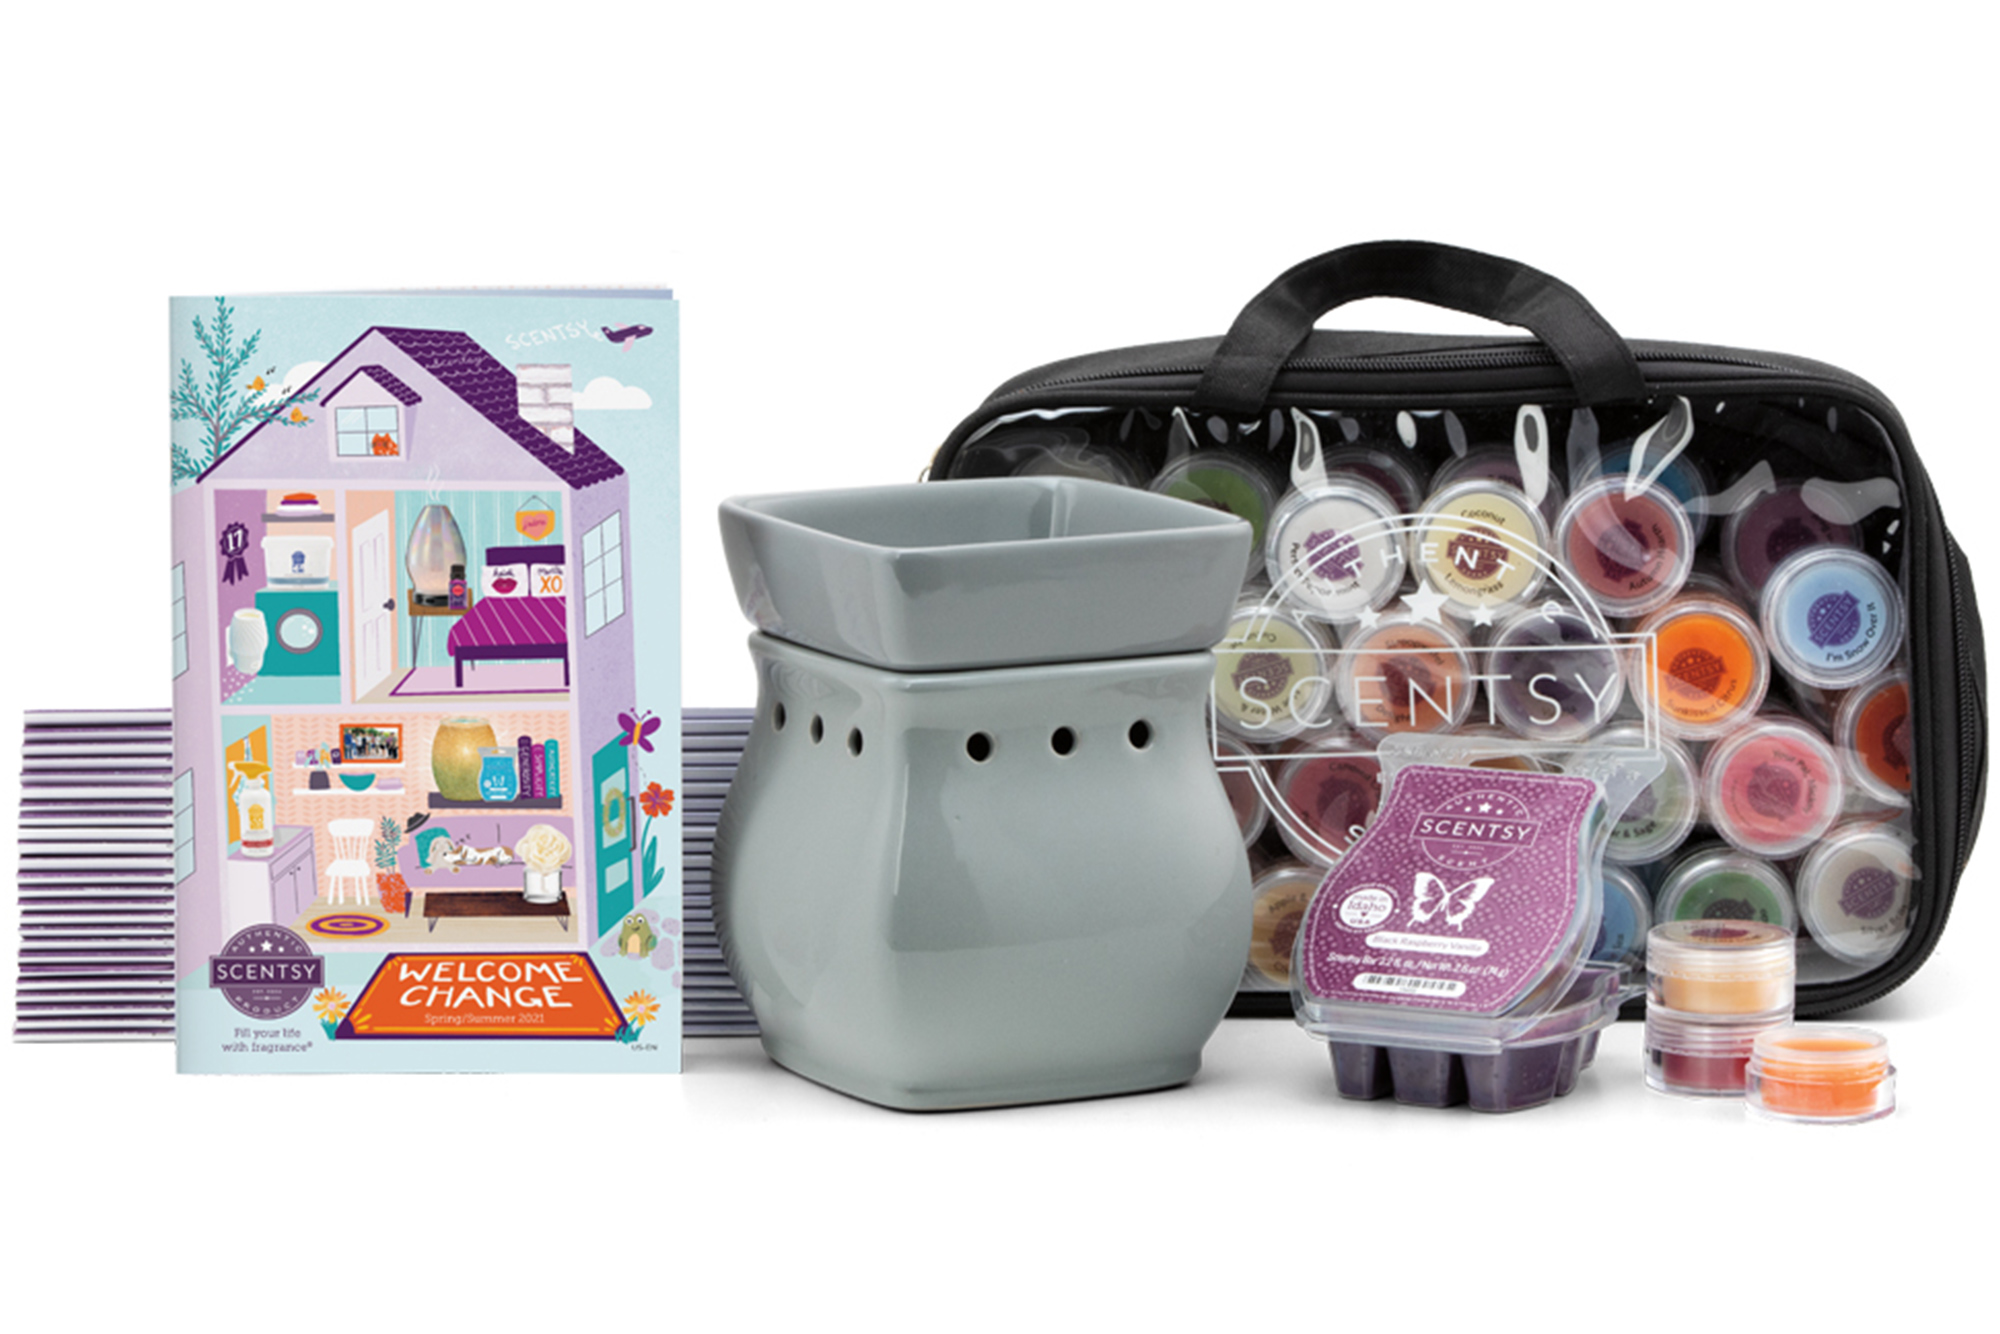 What to expect when you join Scentsy